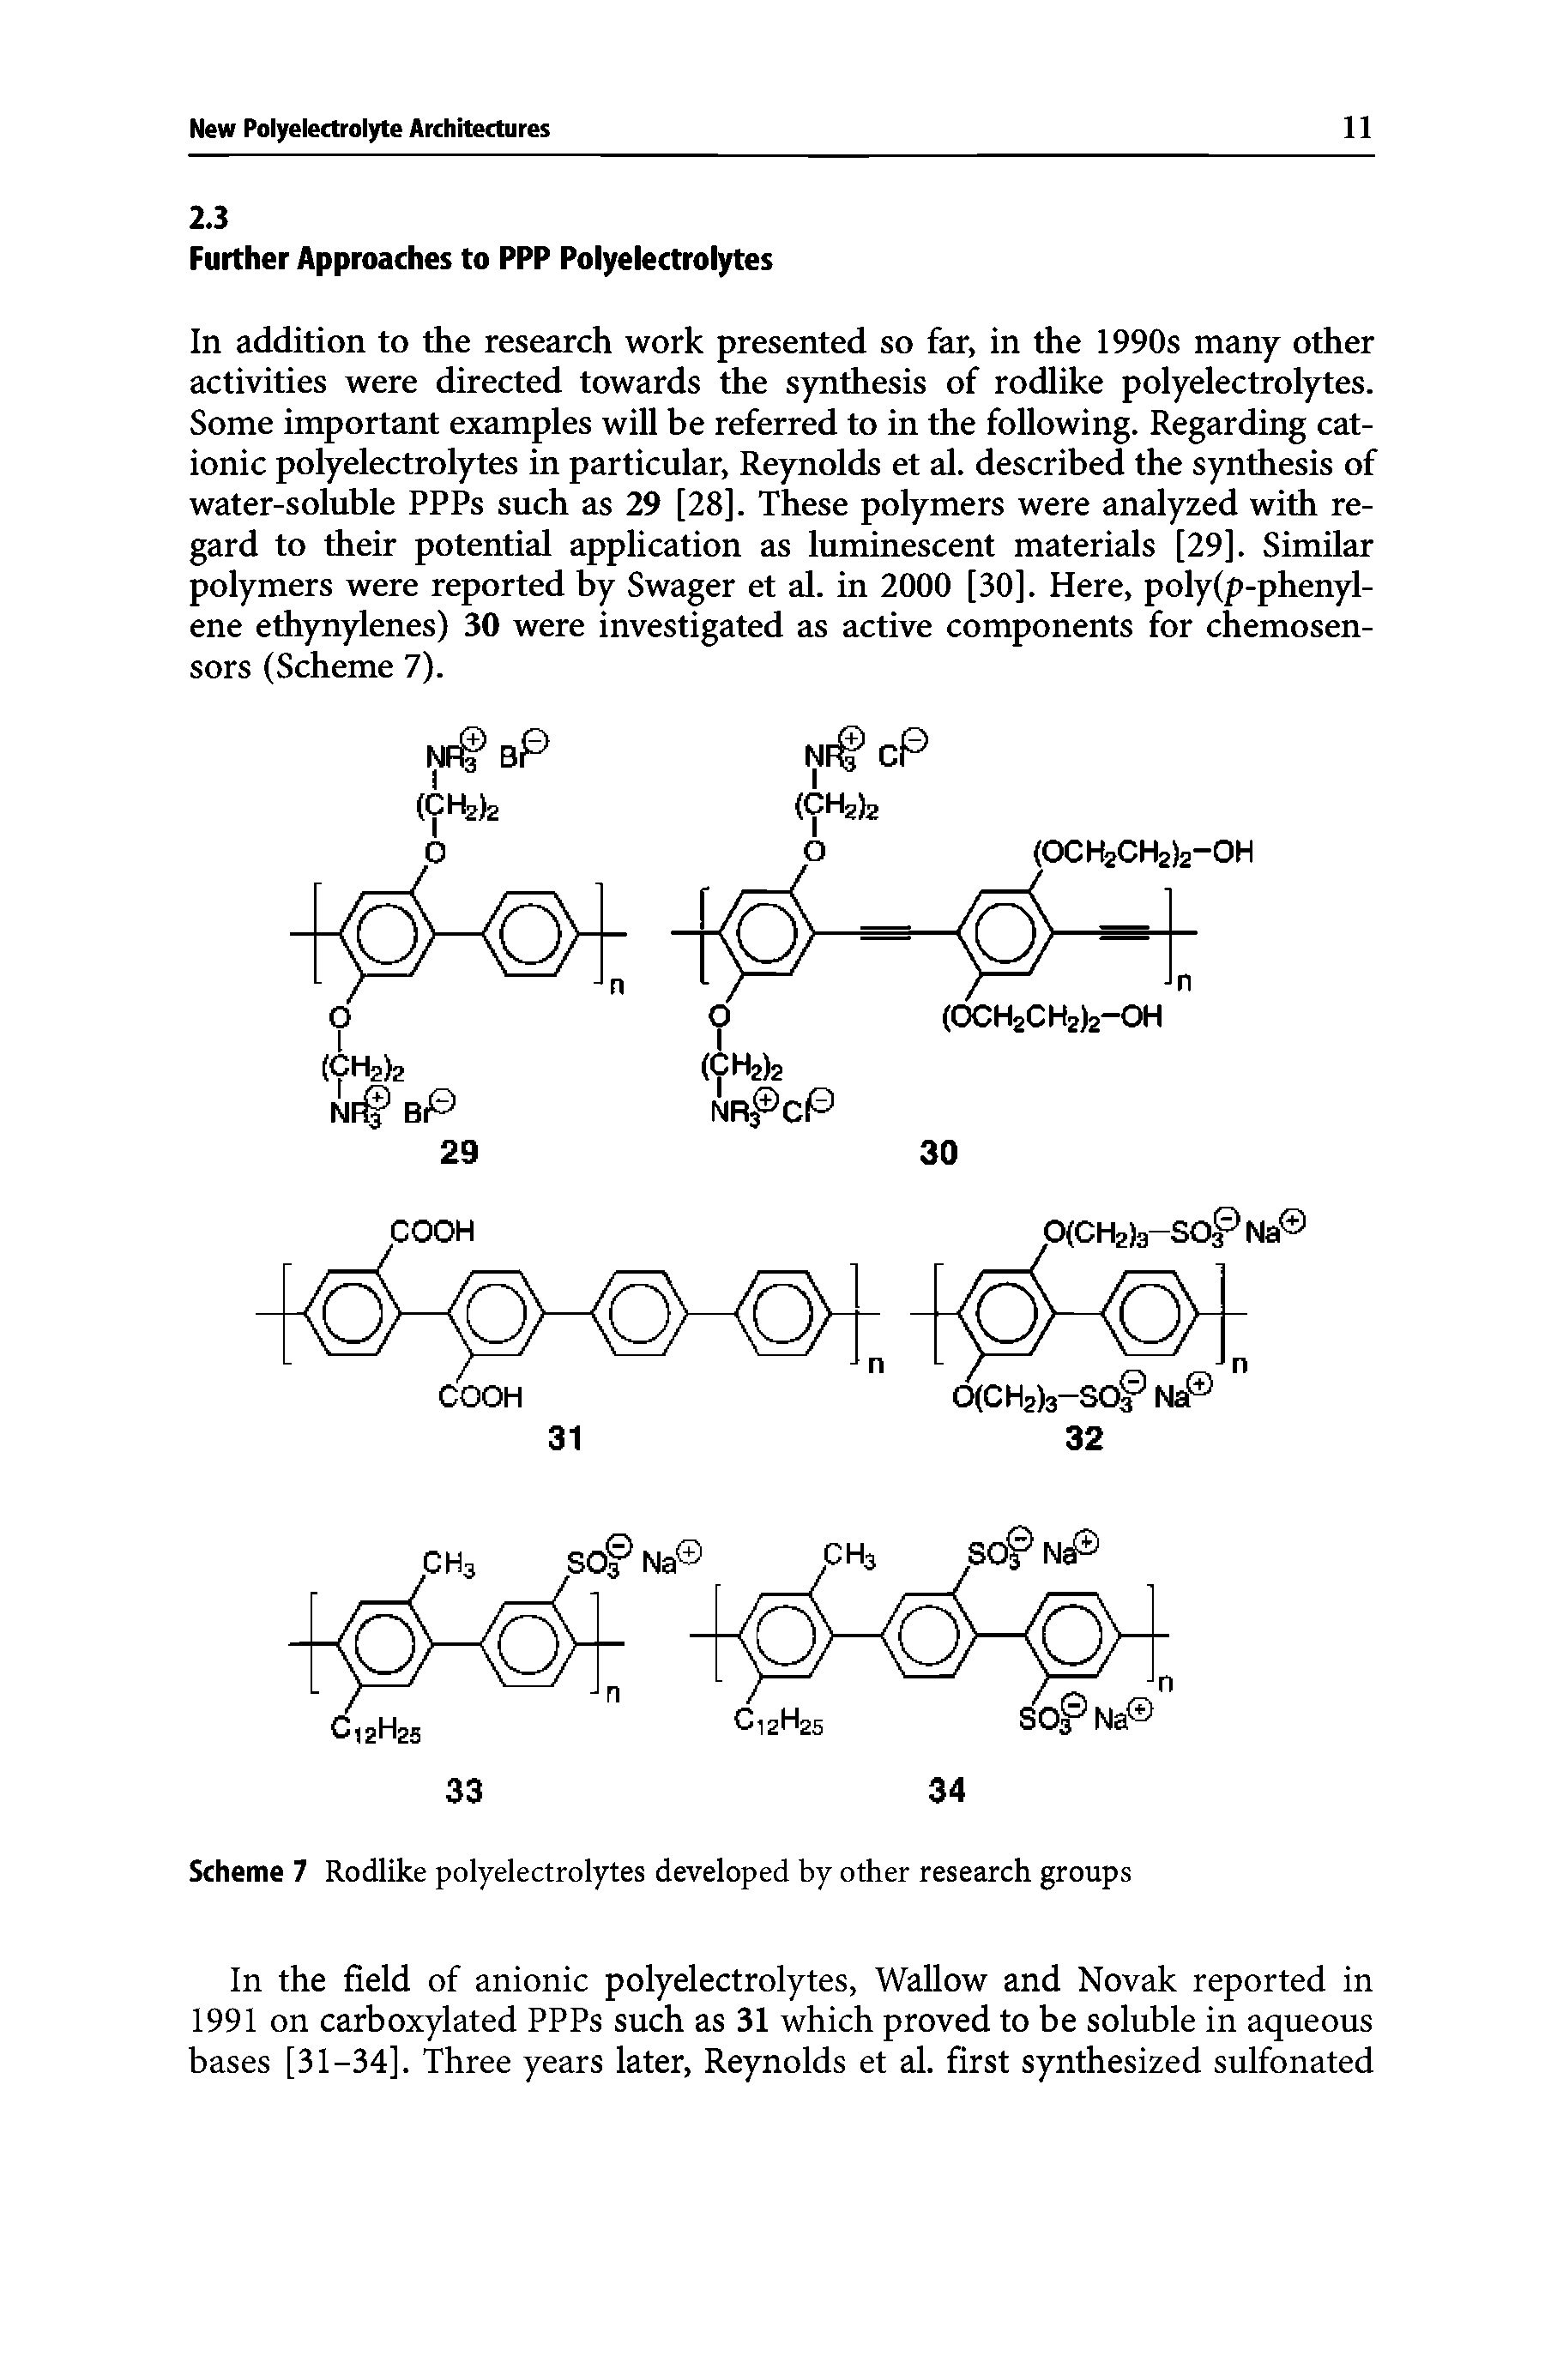 Scheme 7 Rodlike polyelectrolytes developed by other research groups...